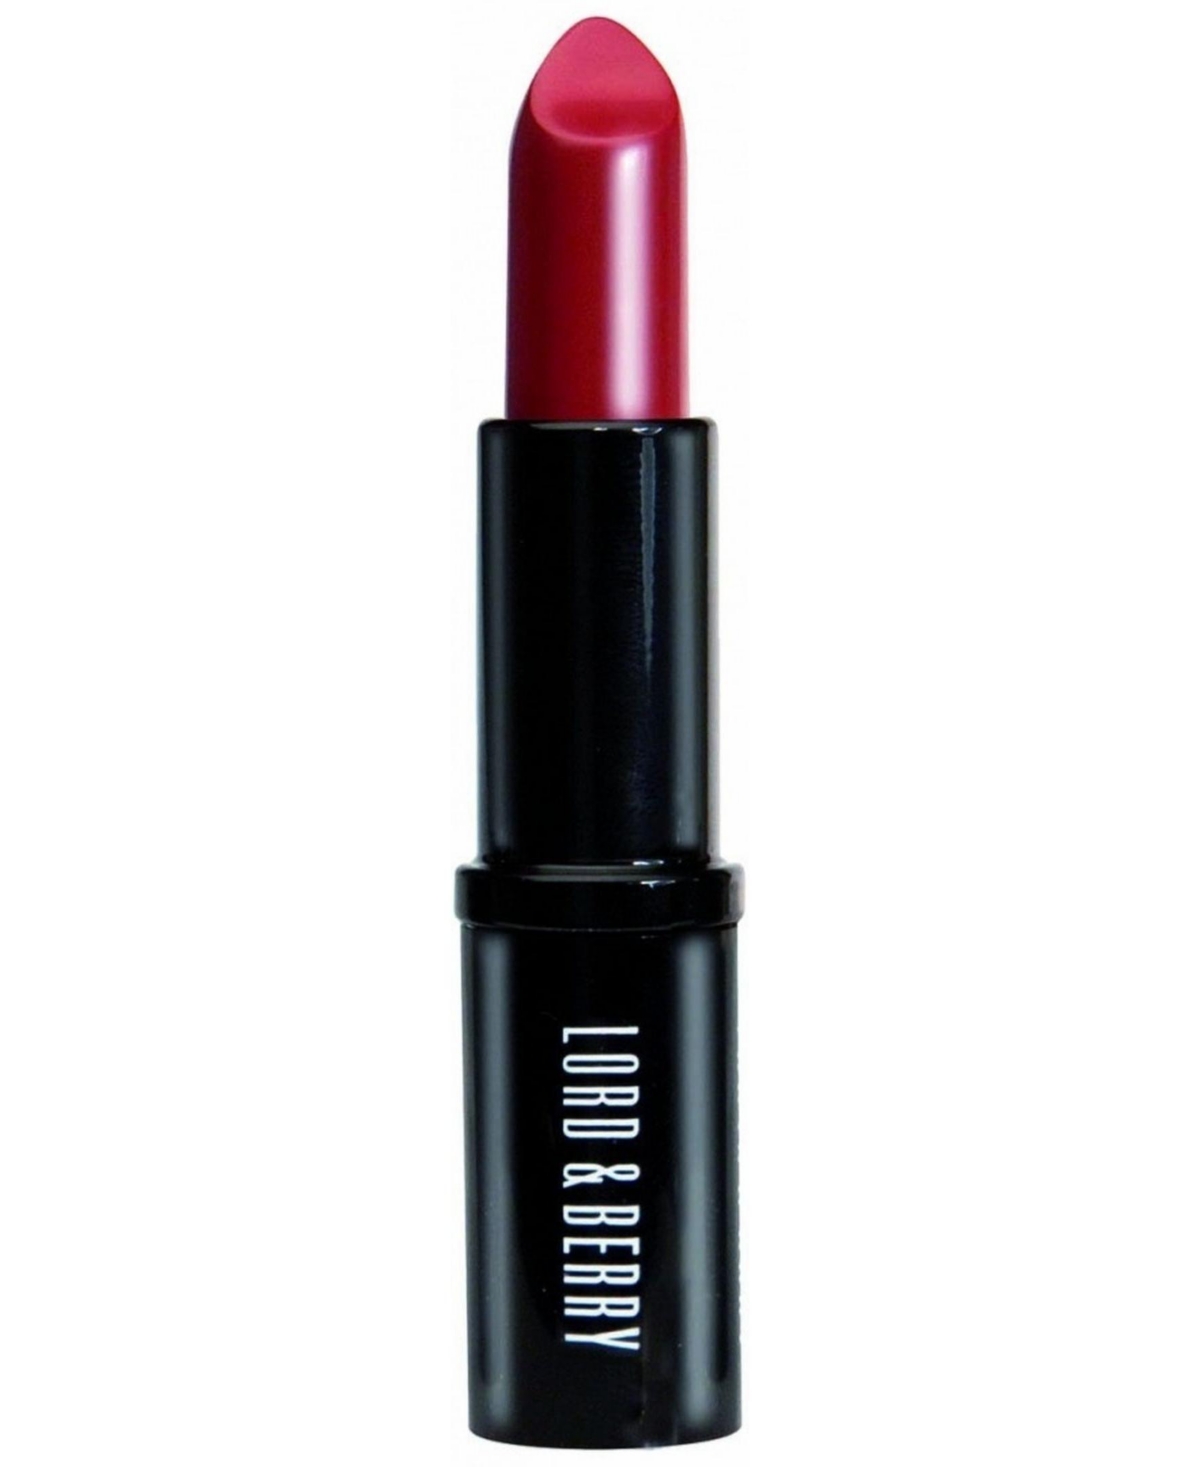 Lord & Berry Vogue Matte Lipstick In China Red - Deep Burnt Red